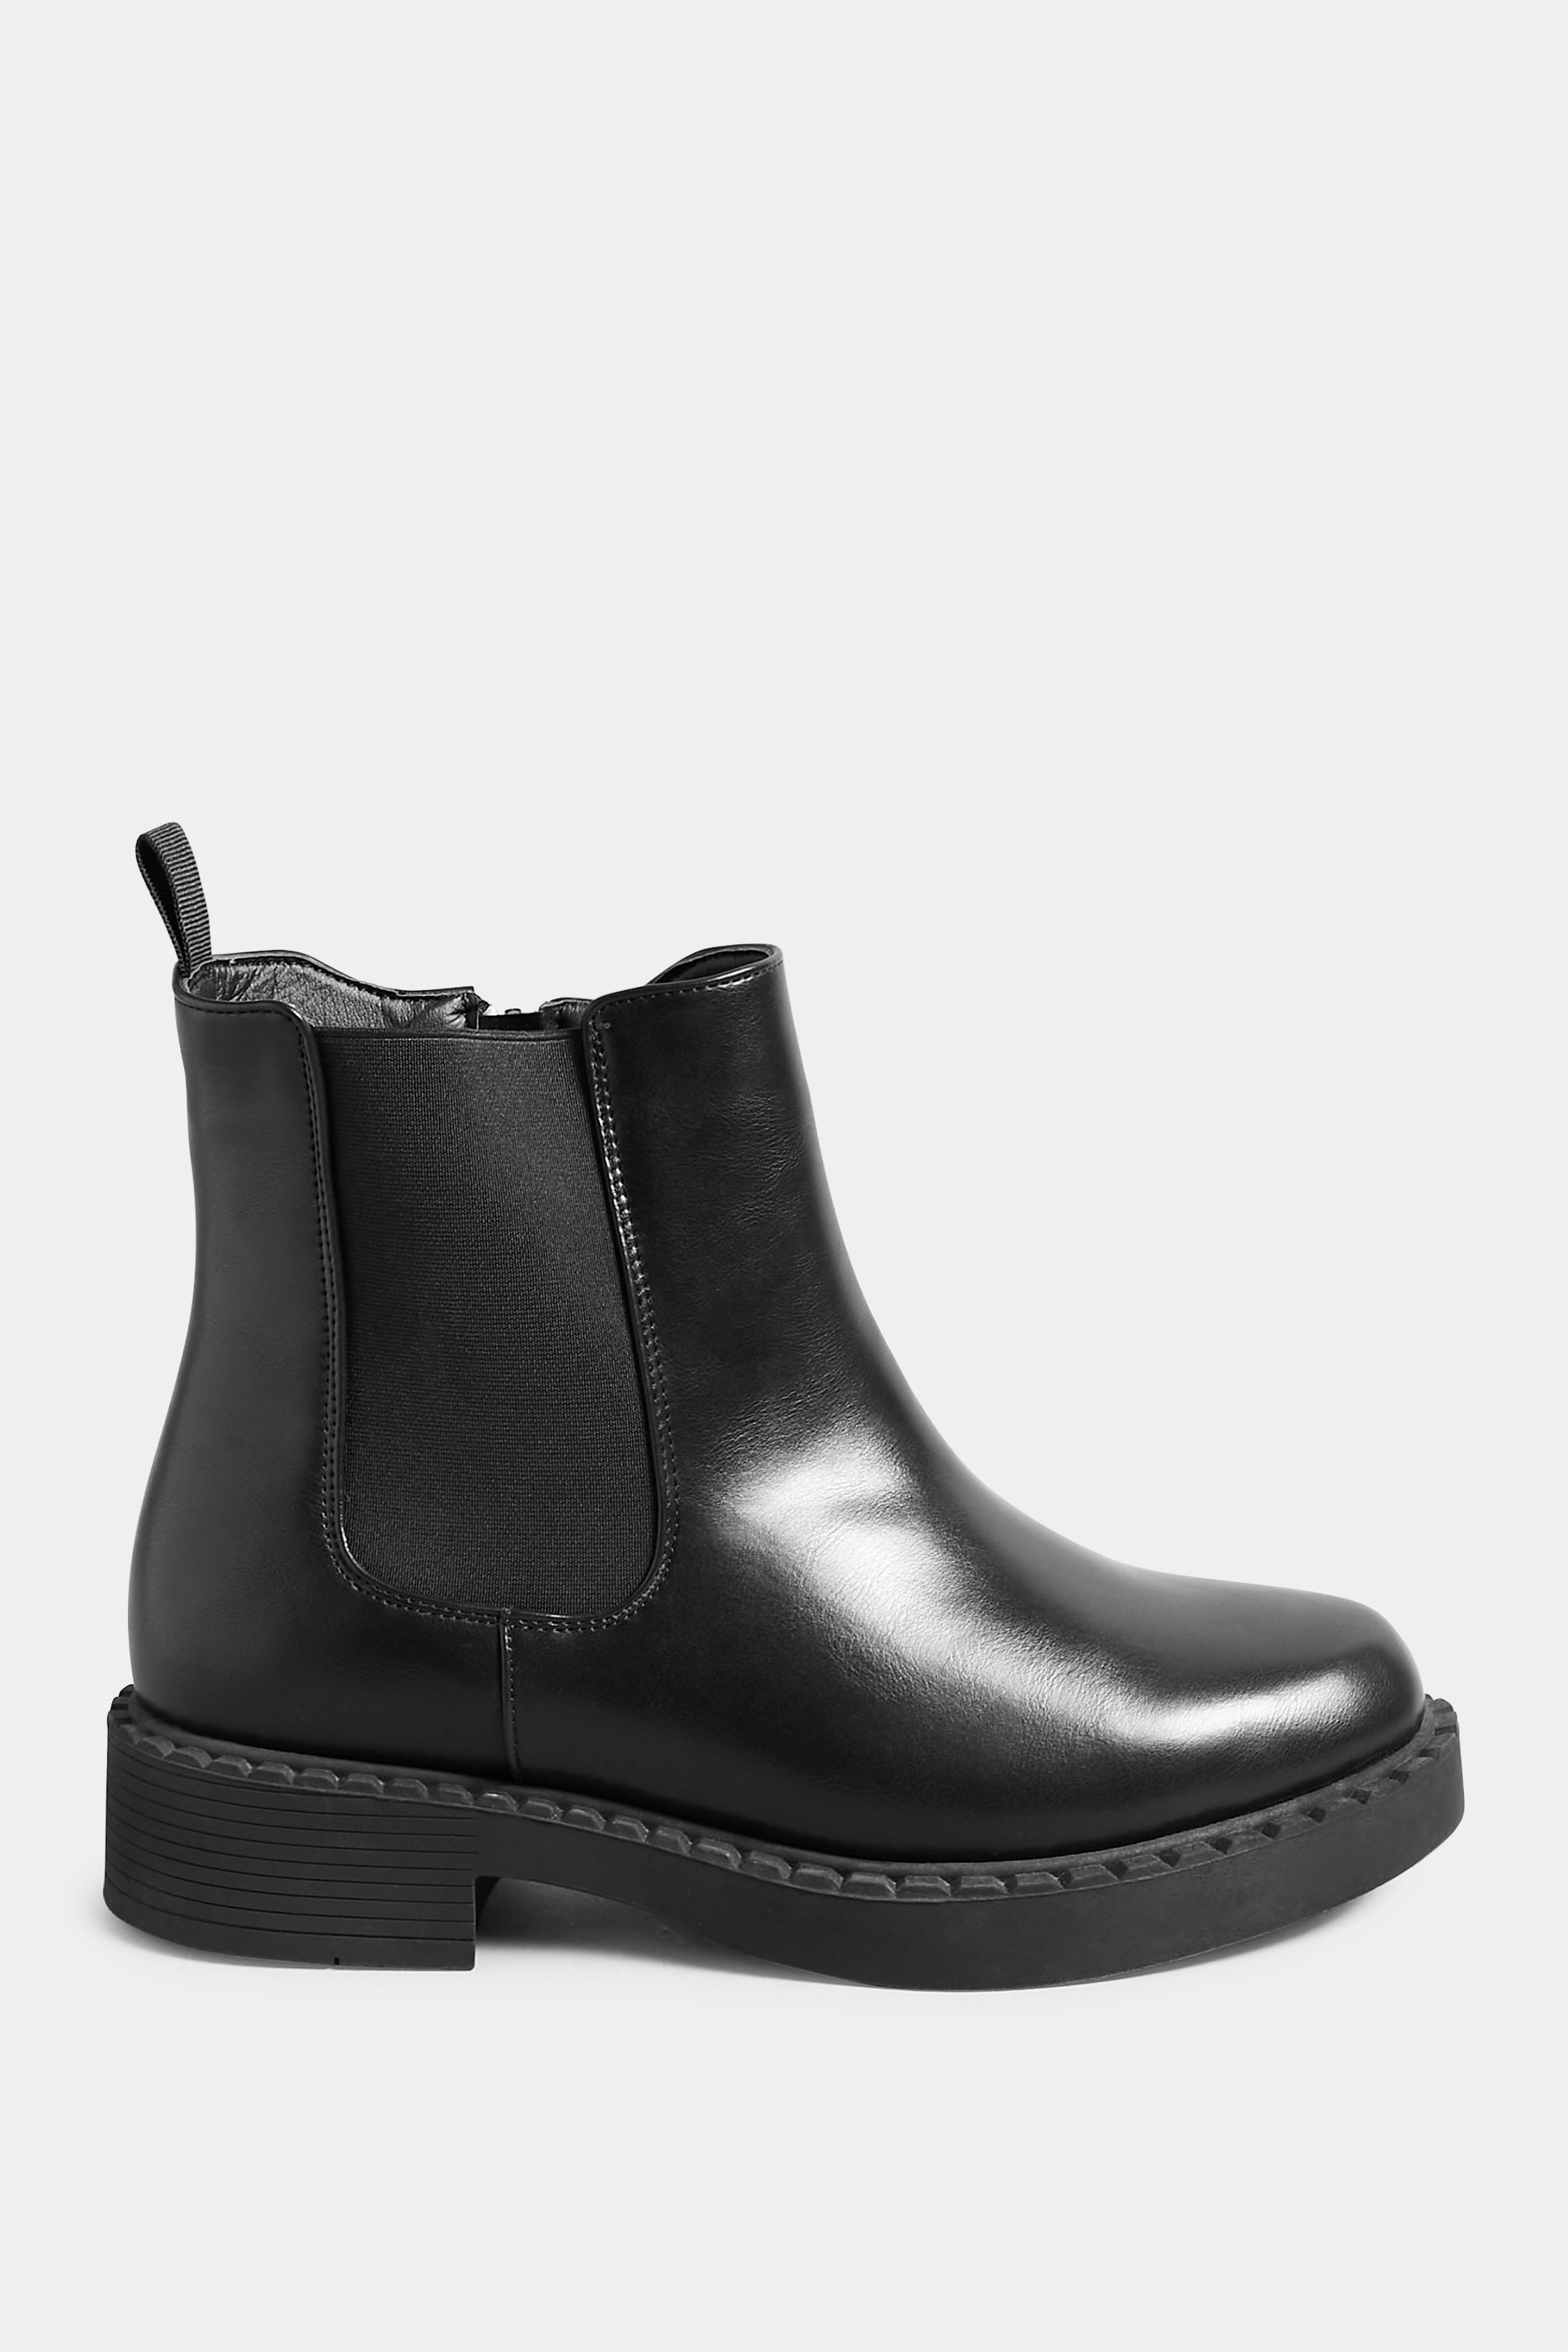 Ungdom Terminal håndled LIMITED COLLECTION Black Faux Leather Chelsea Boots In Extra Wide EEE Fit |  Yours Clothing